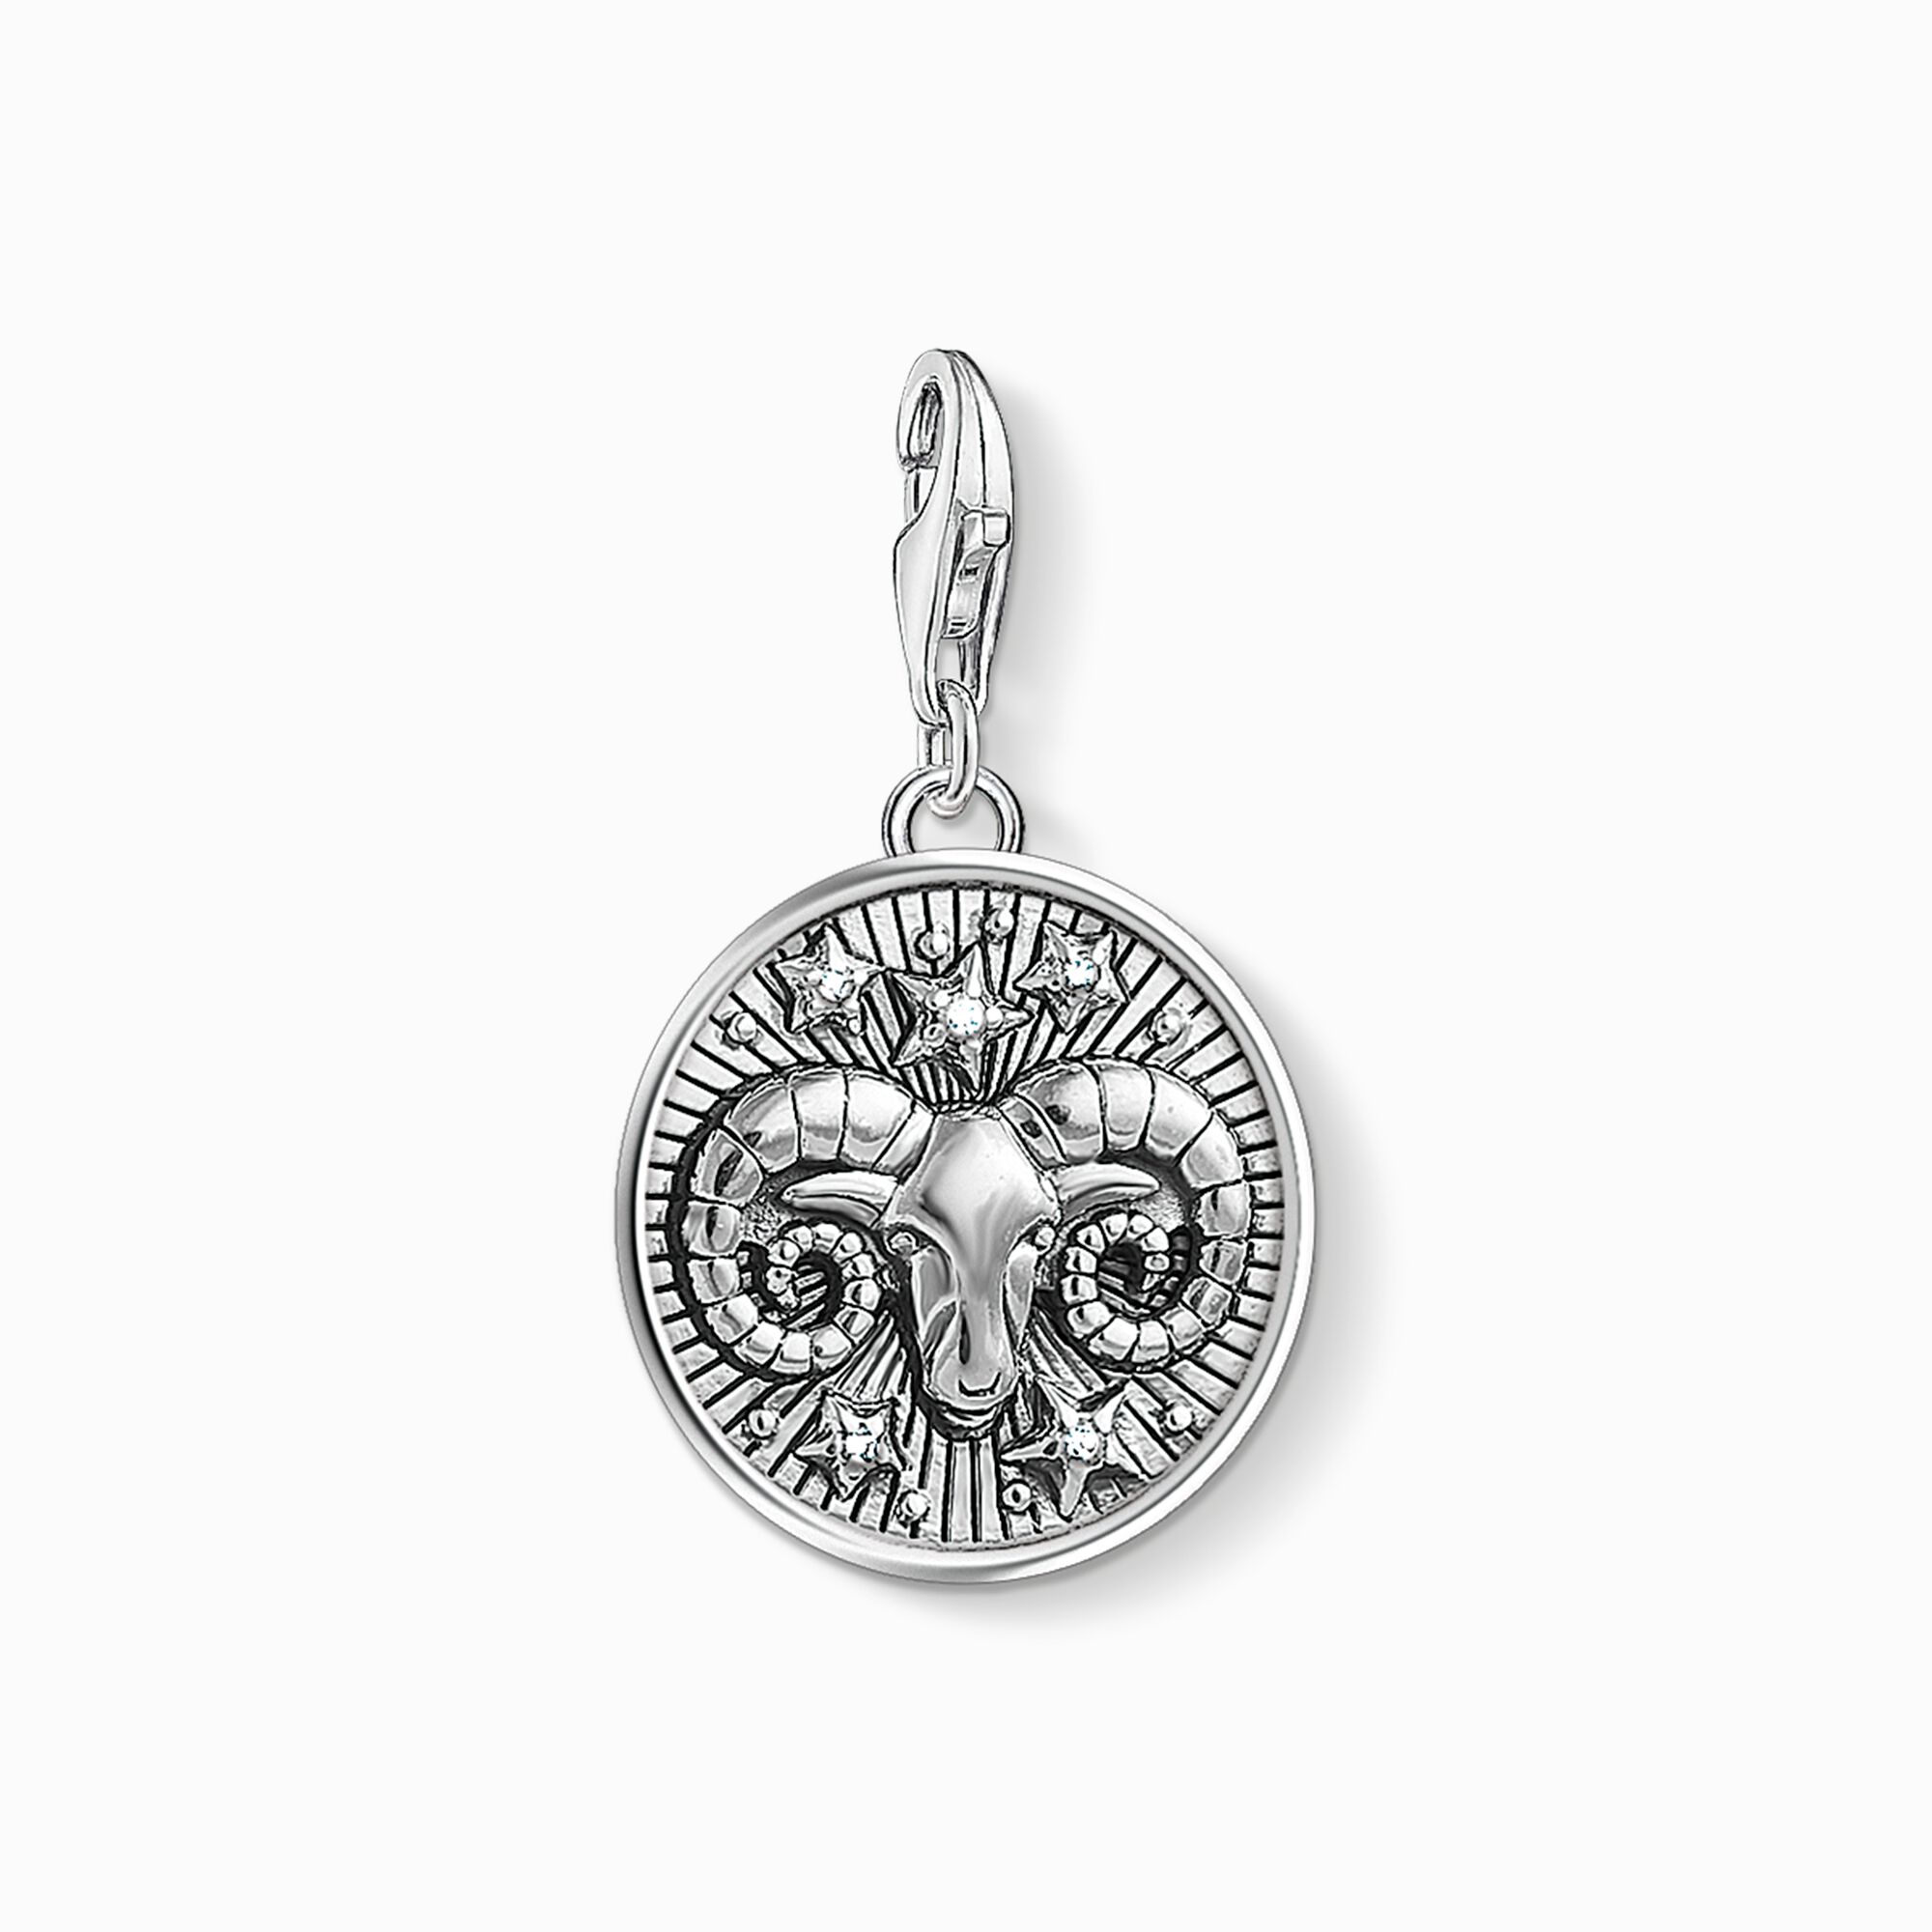 Charm pendant zodiac sign Aries from the Charm Club collection in the THOMAS SABO online store